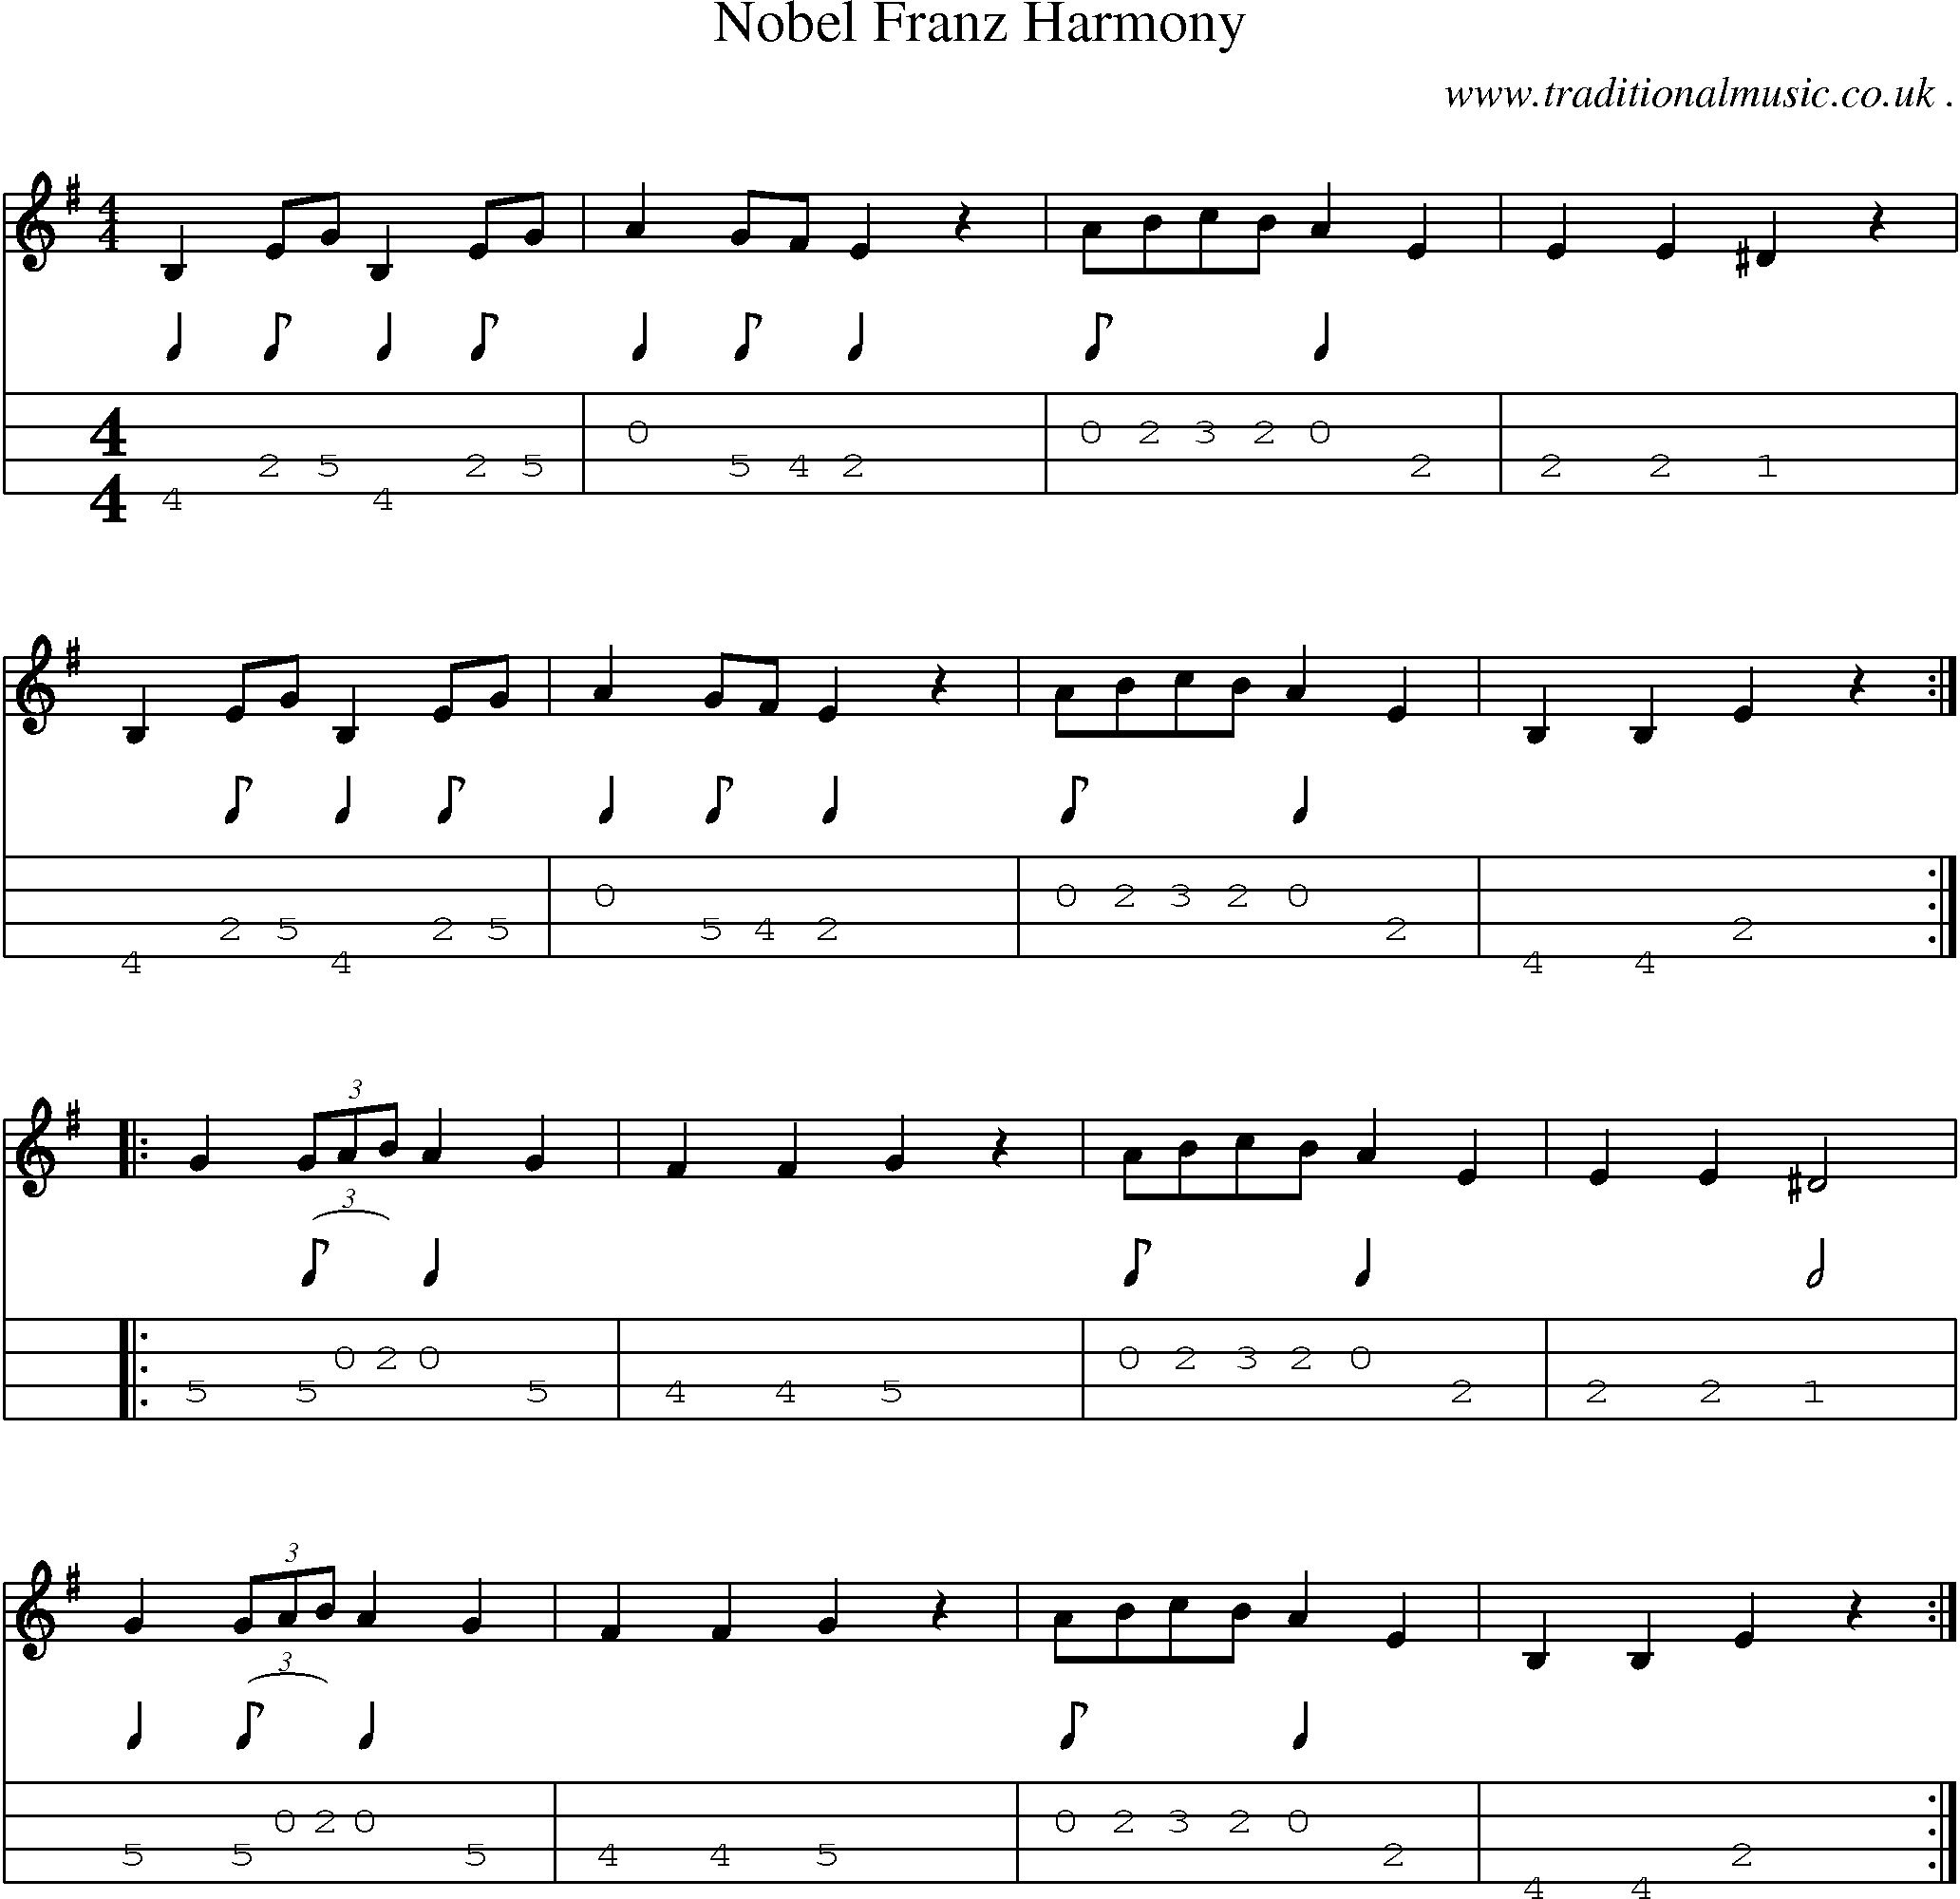 Music Score and Guitar Tabs for Nobel Franz Harmony